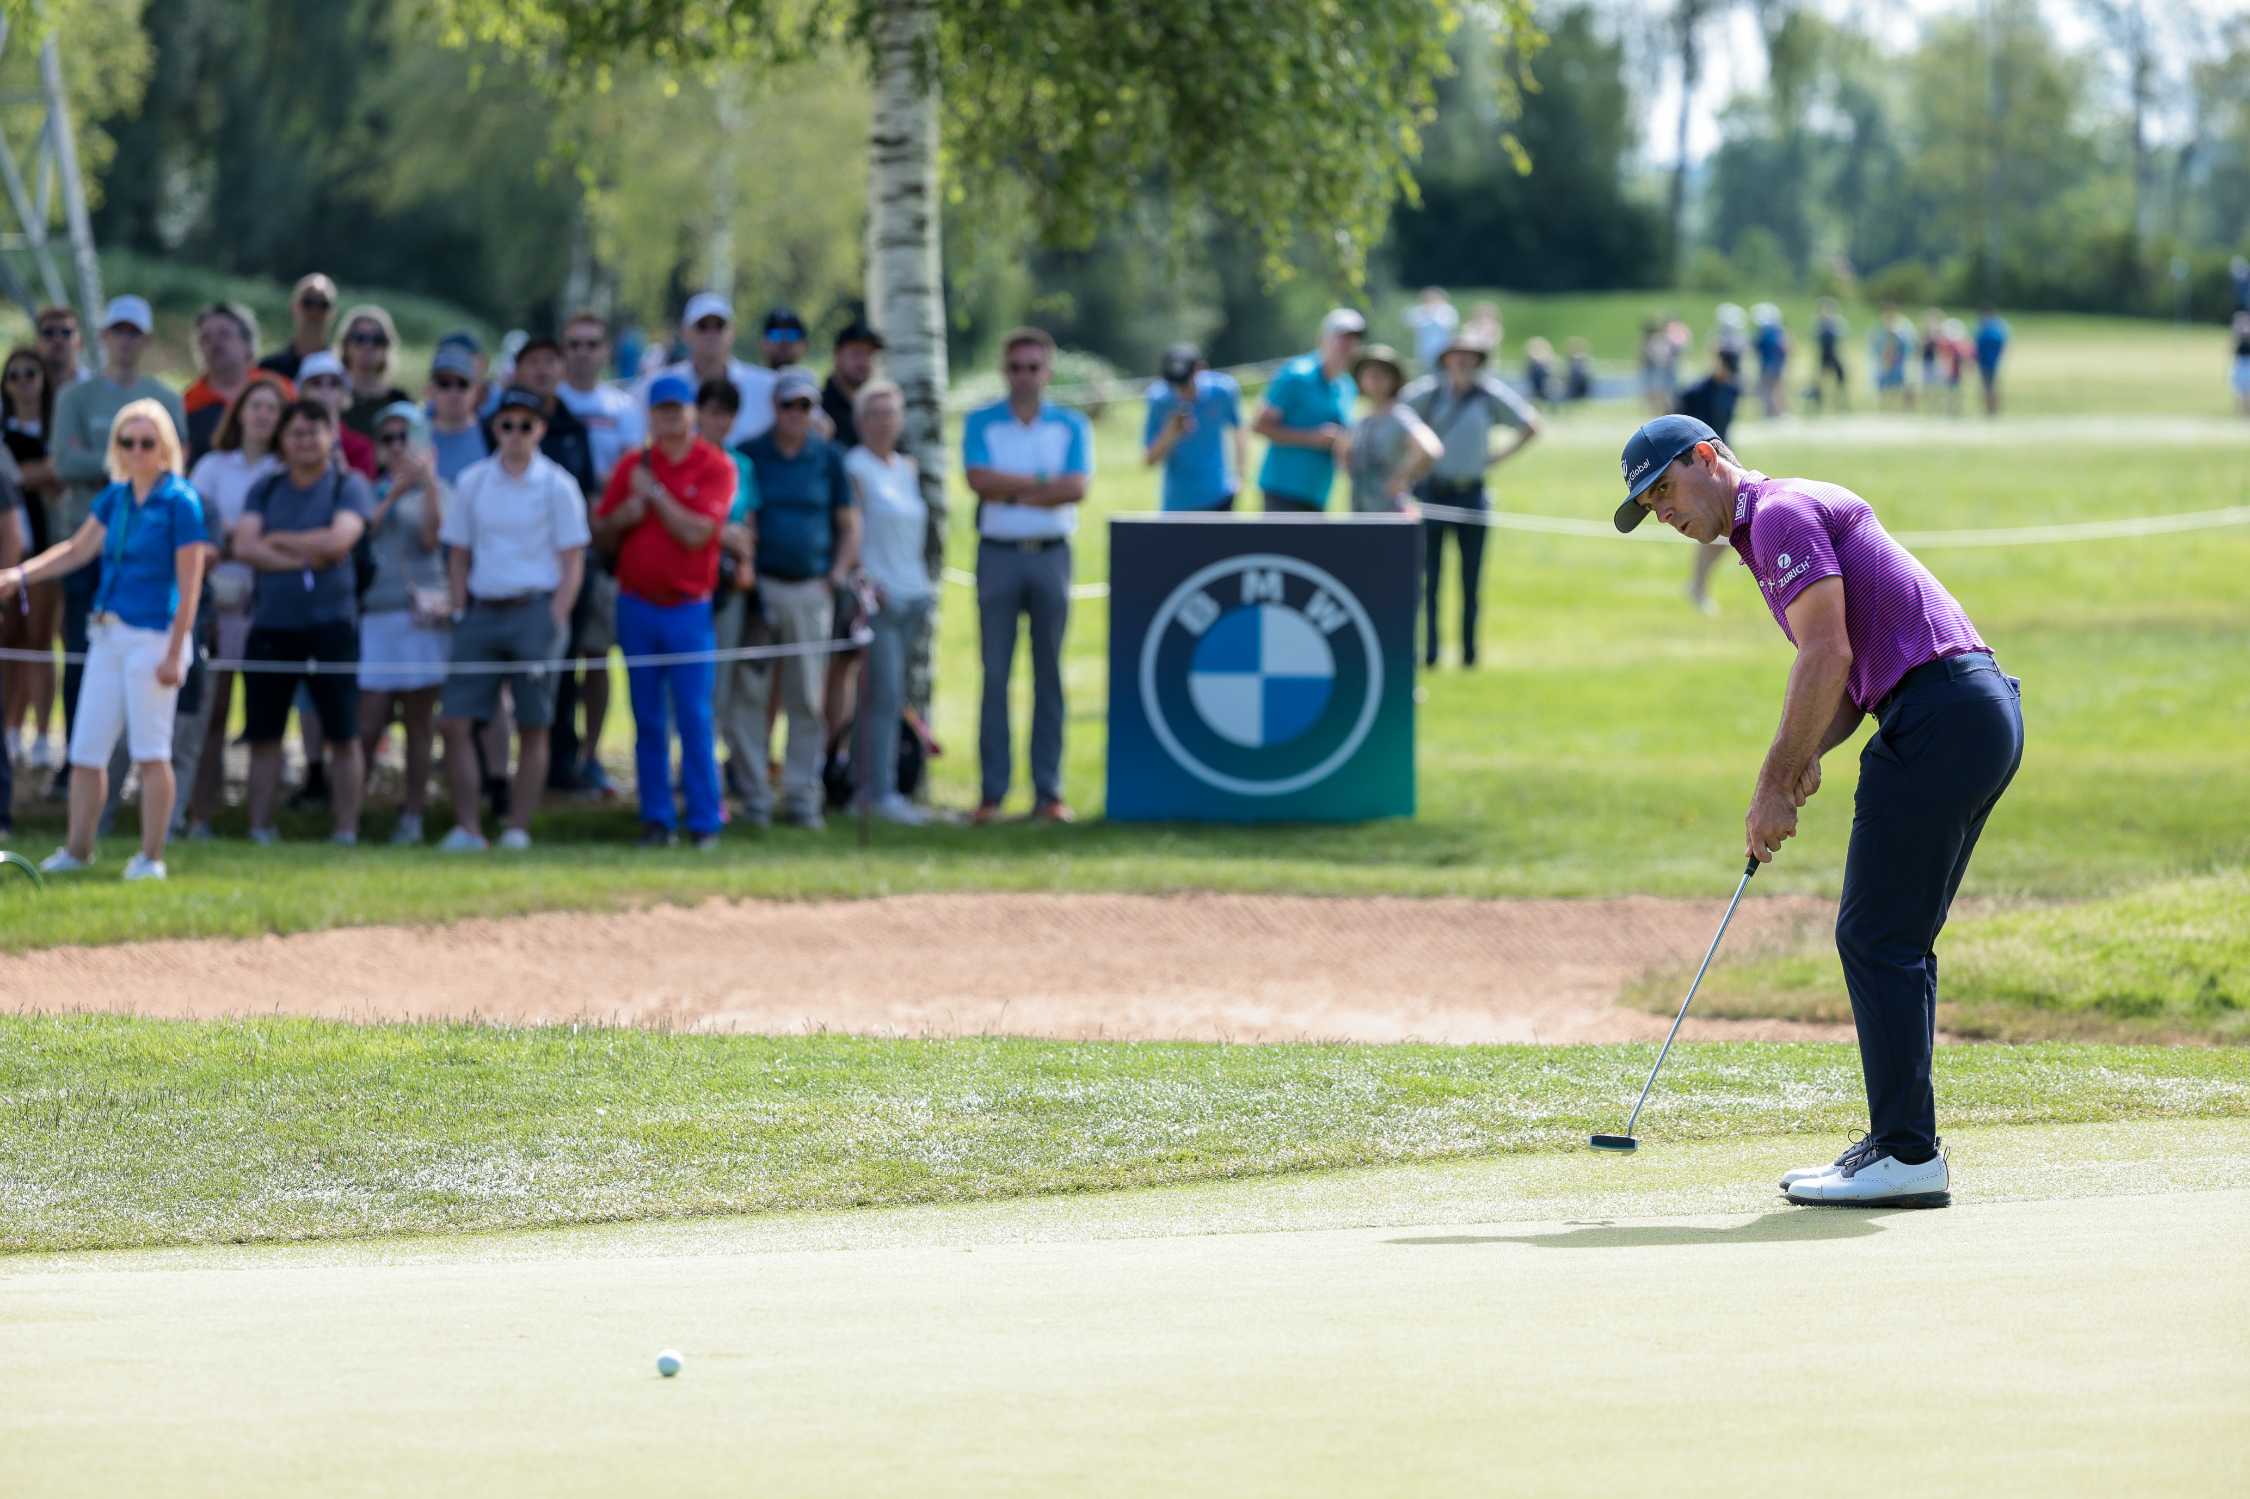 BMW International Open: Images from Saturday morning.